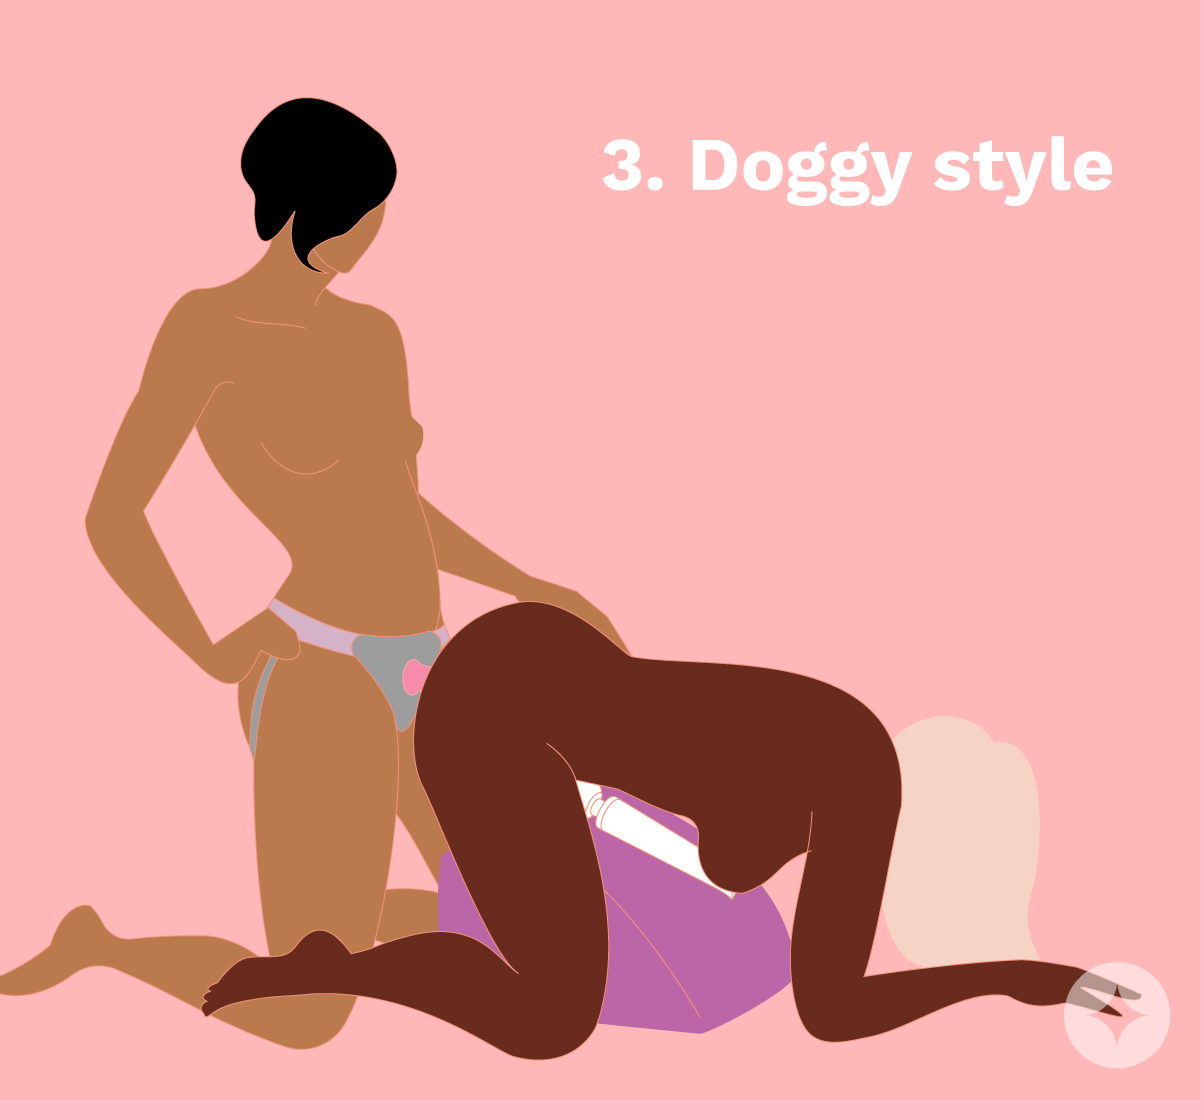 The doggystyle position gives you a number of ways to use sex toys with your partner